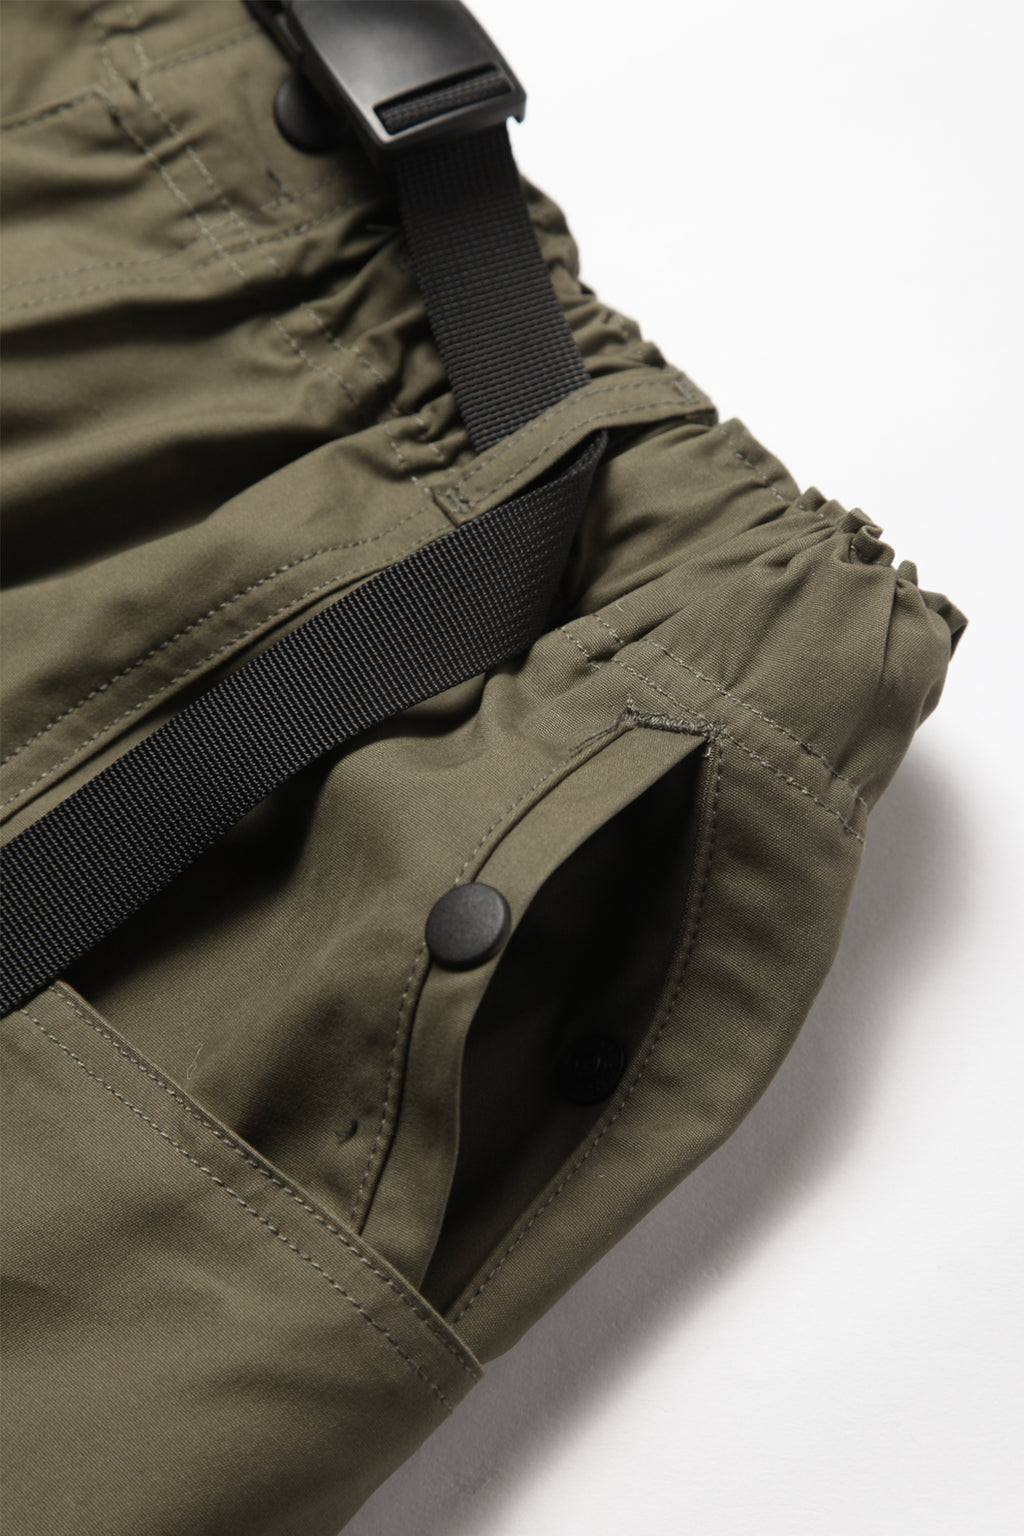 TRS - Loose Climbing Pants - Olive